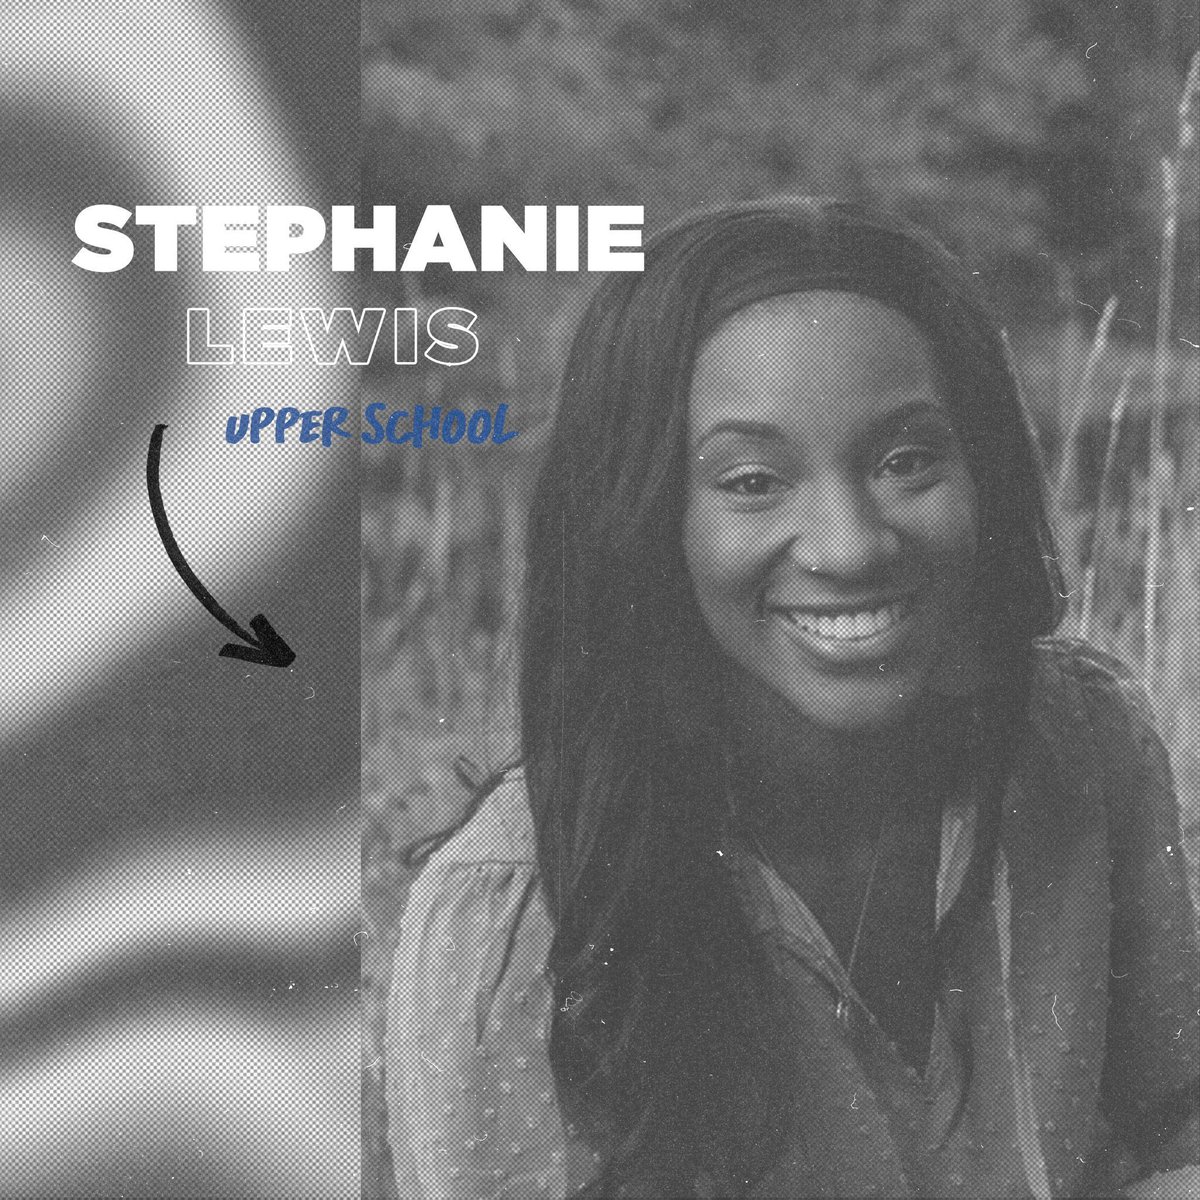 Meet Stephanie Lewis, our passionate science teacher at CLS Middle School. She holds a Bachelor of Arts degree from the University of Wisconsin - Parkside and has 8 years of experience in professional wedding photography. Join her to learn and grow together!